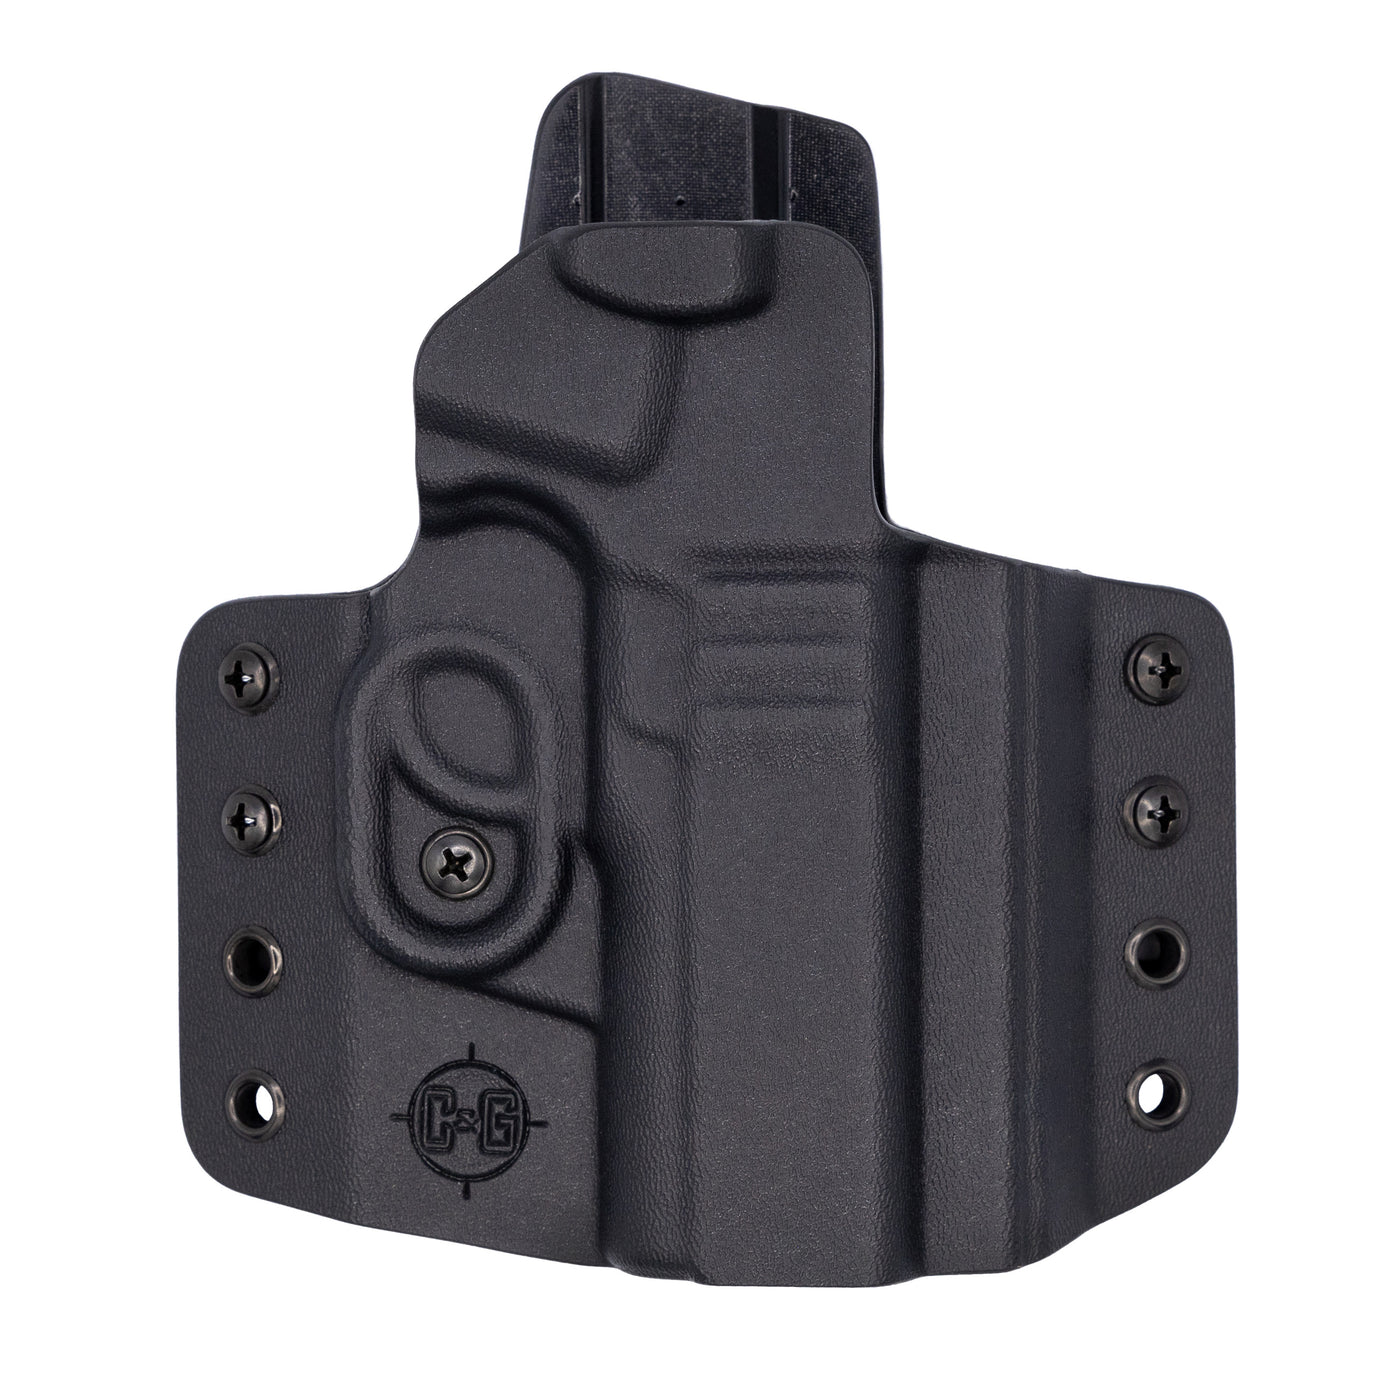 Shown is a quickship C&G Holster Covert series outside the waistband holster for a Springfield Armory EMP.